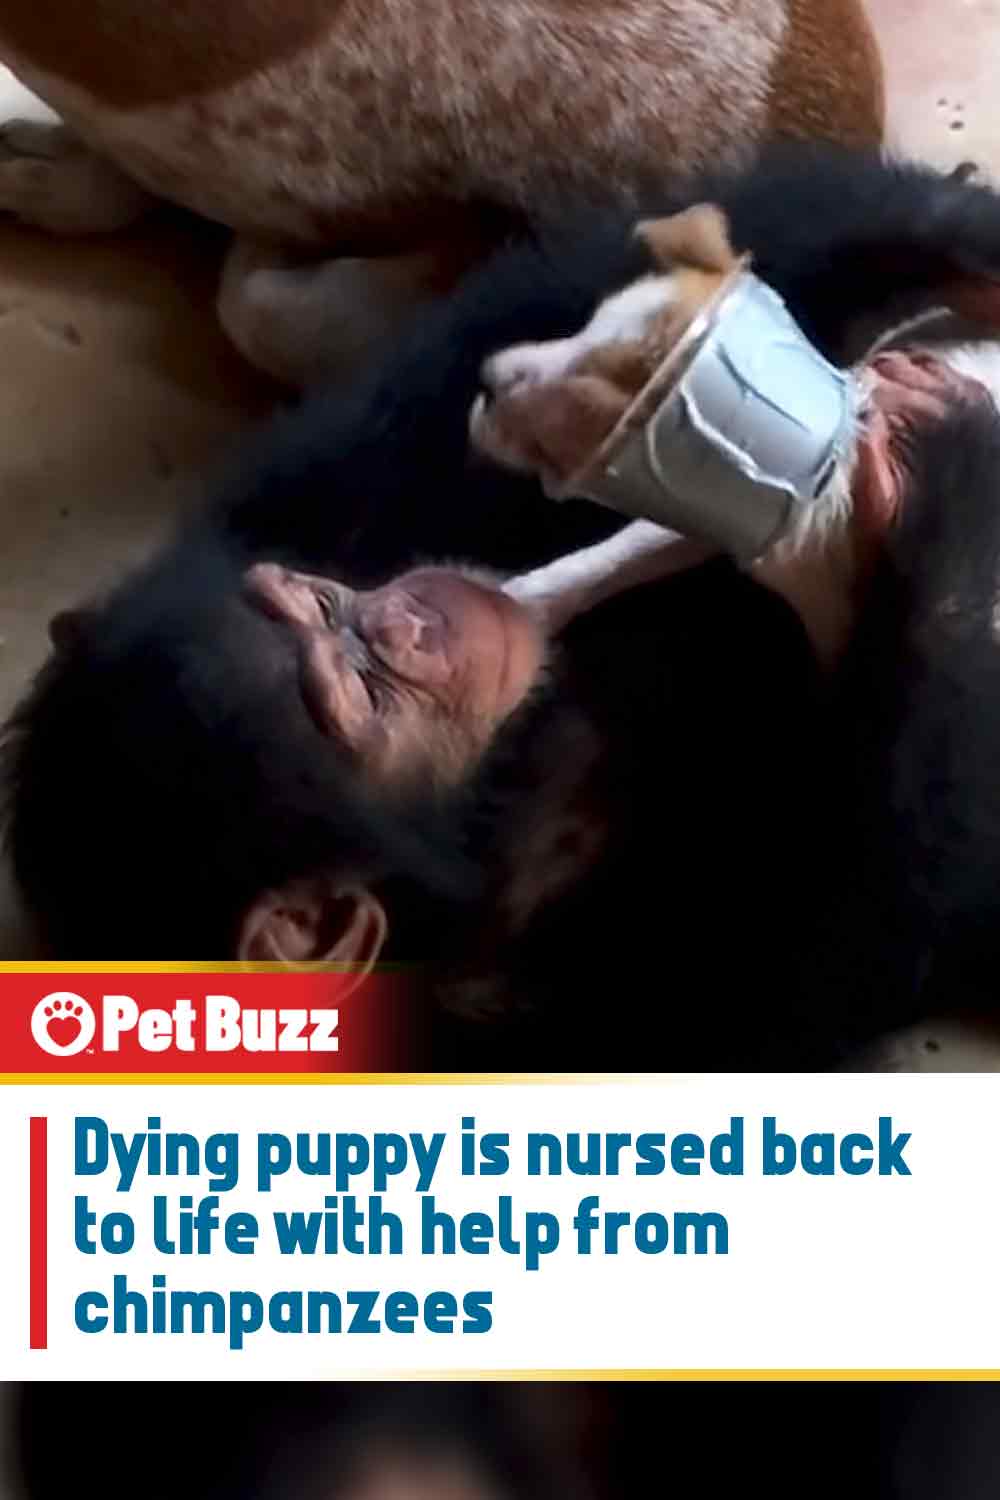 Dying puppy is nursed back to life with help from chimpanzees